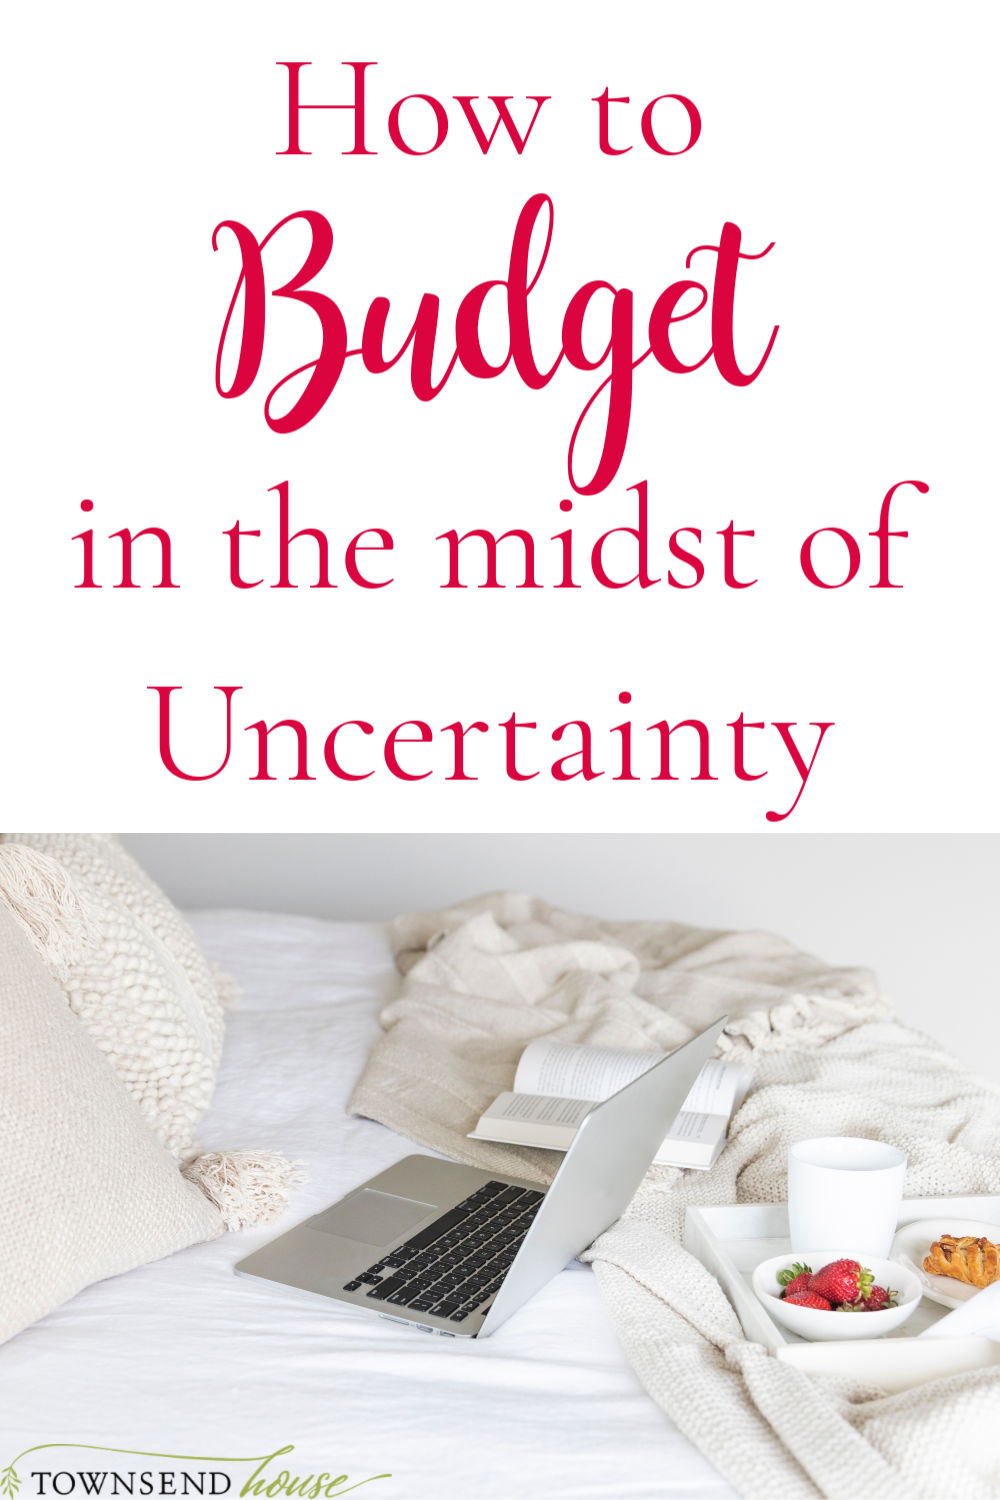 How to Budget in the Midst of Uncertainty